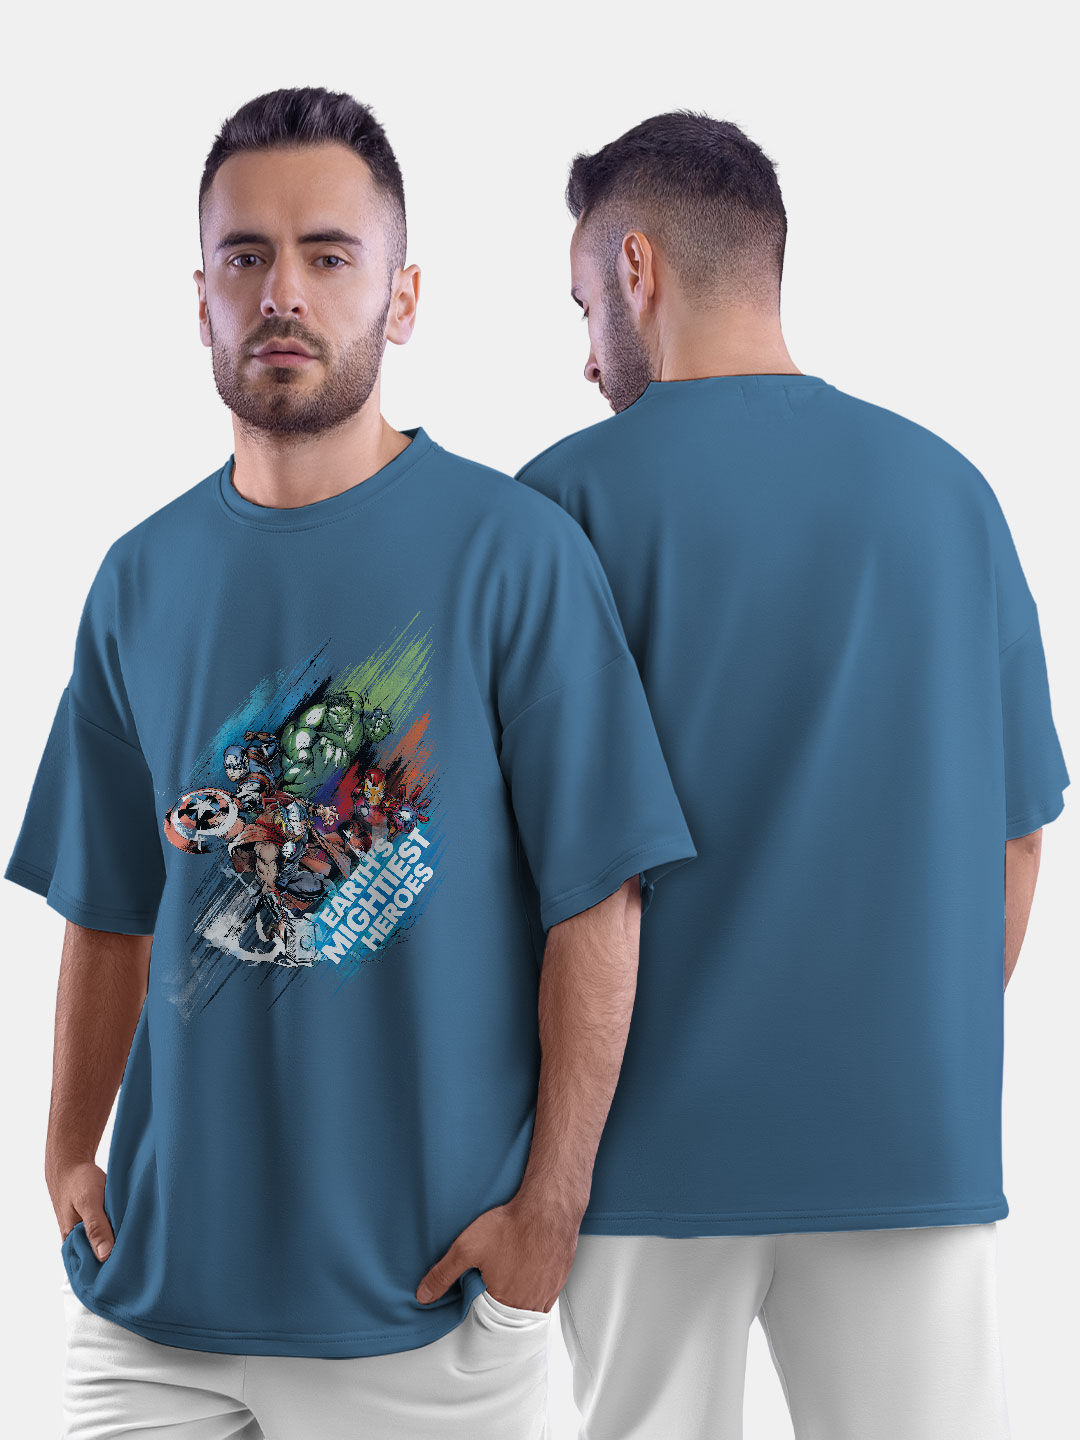 Buy Earth's Mightiest Heroes - Male Oversized T-Shirt T-Shirts Online